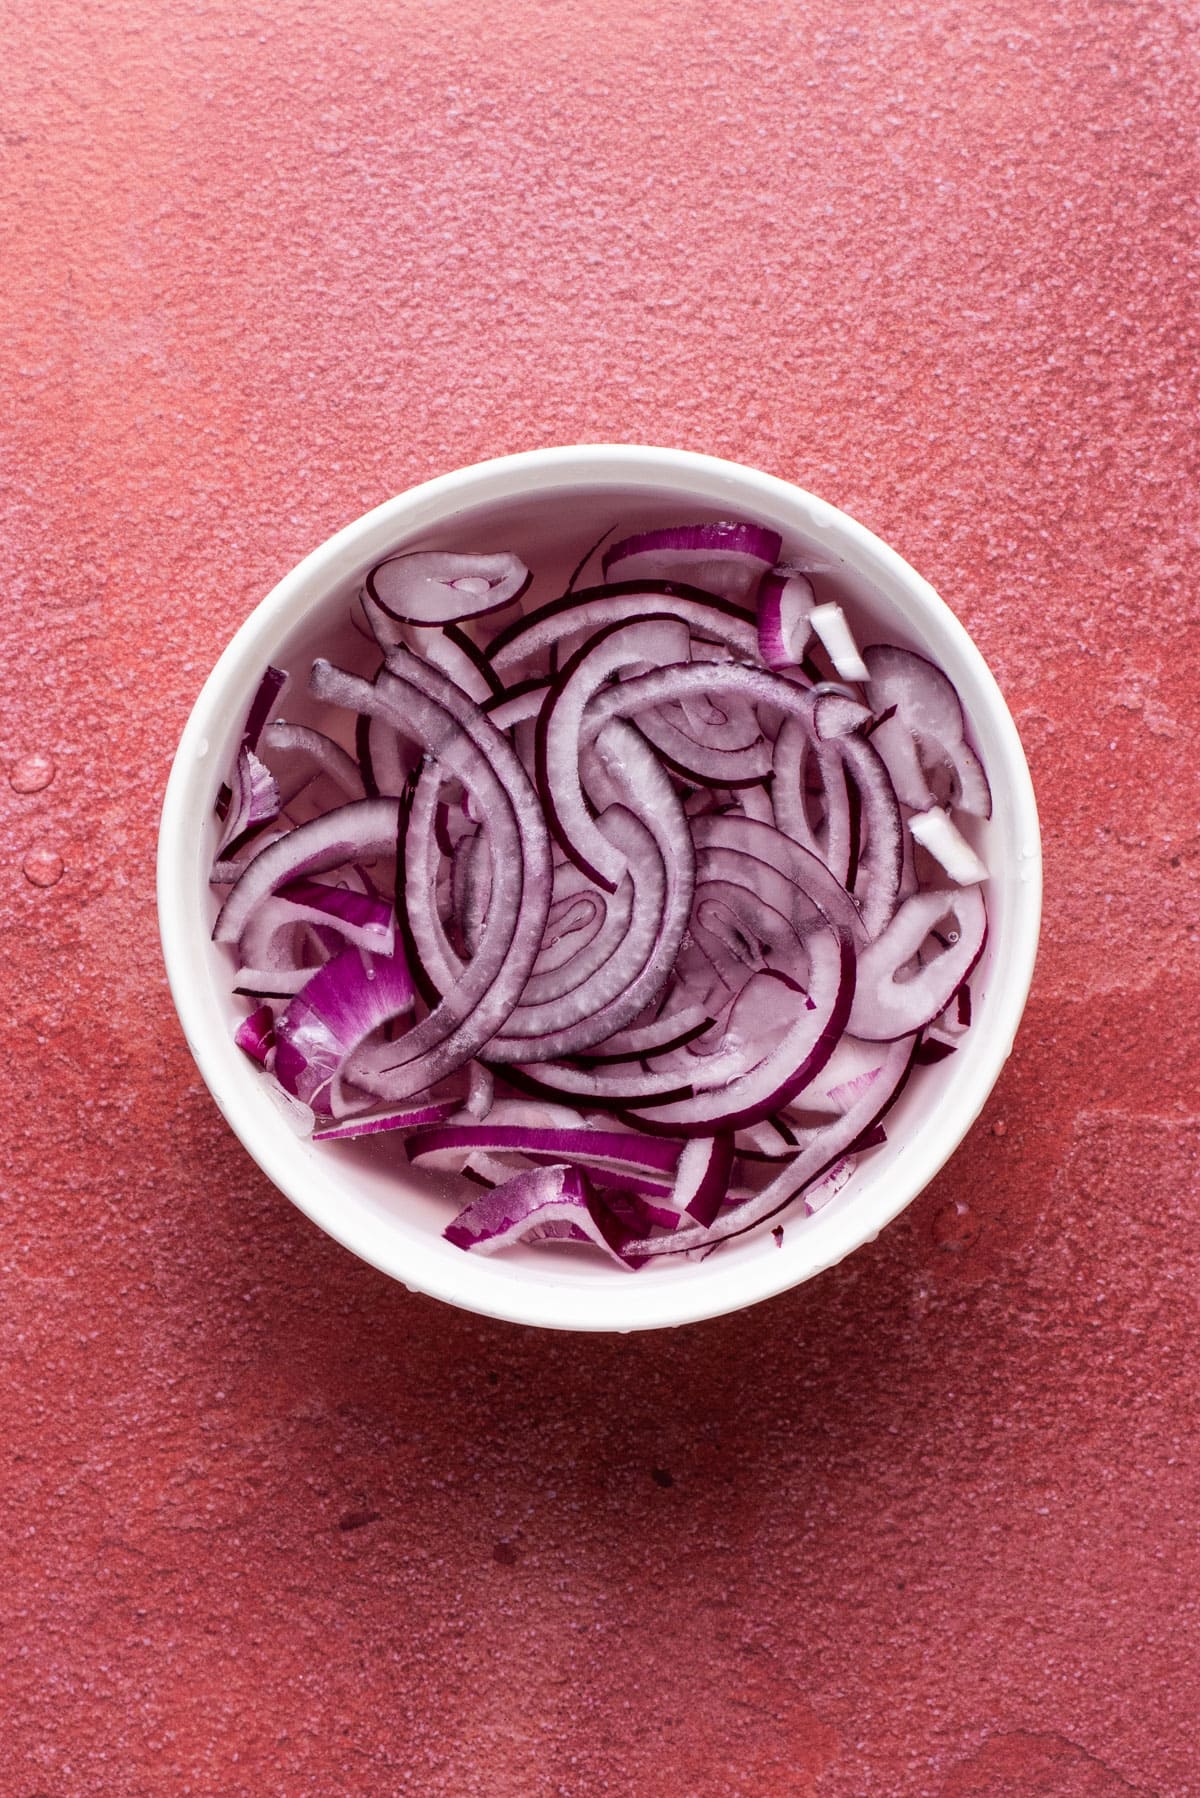 Red onion soaking in a bowl of water.